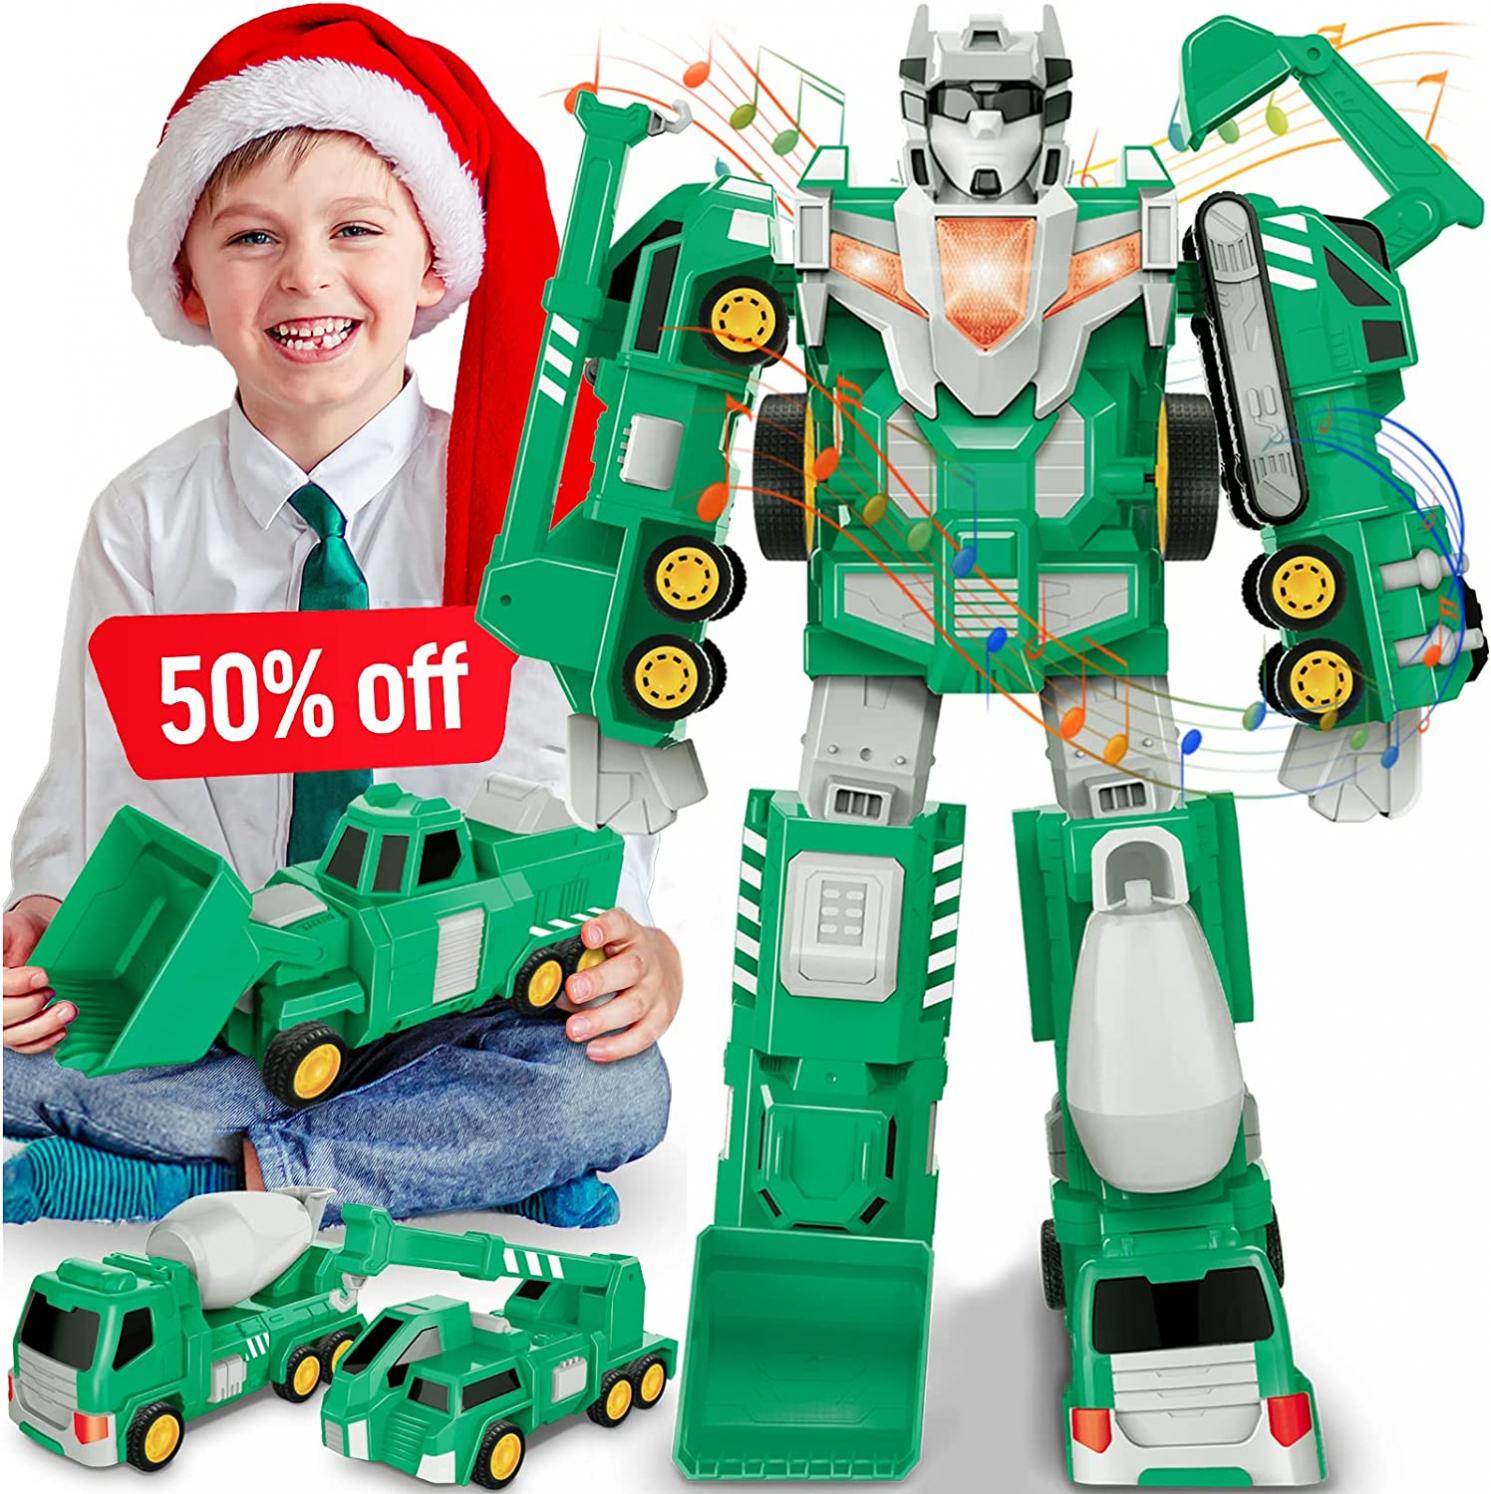 Laradola Toys for 3 4 5 6 7 8 Year Old Boys - Transform Robot Kids Toys Cars | STEM Building Toddler Toys for Kids Ages 4-8 | 5 in 1 Construction Toys Christmas Birthday Gifts for Boy Girls Kids